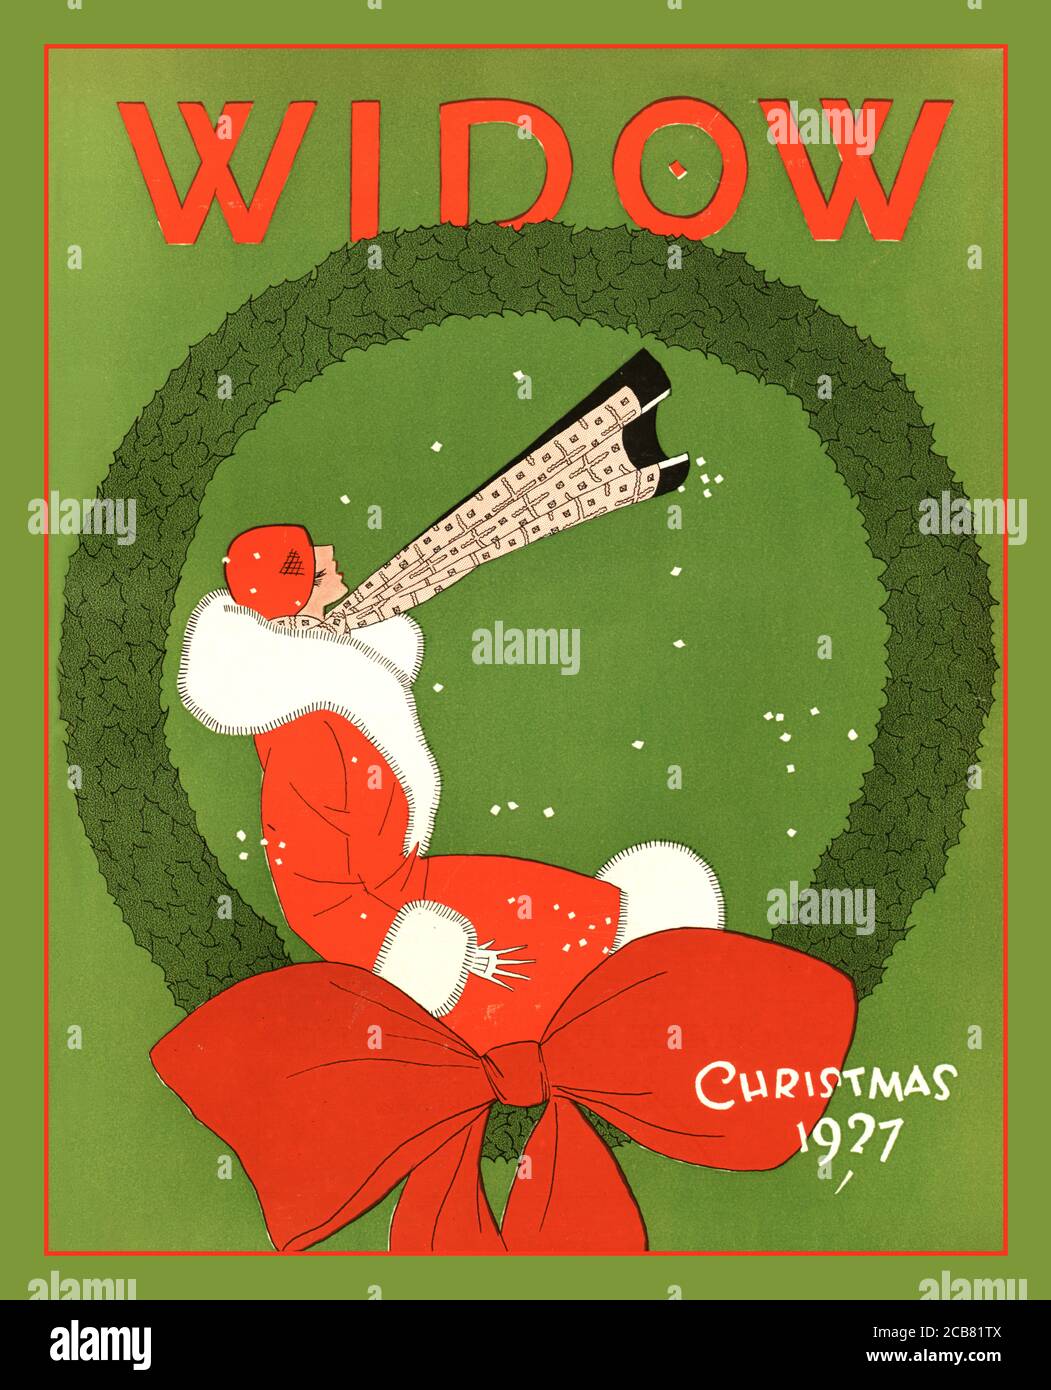 Vintage Christmas Cover The Widow 1927 Christmas Cover The Widow’s name derives from the college widow, a Cornell University student nickname for an attractive unavailable female student Stock Photo